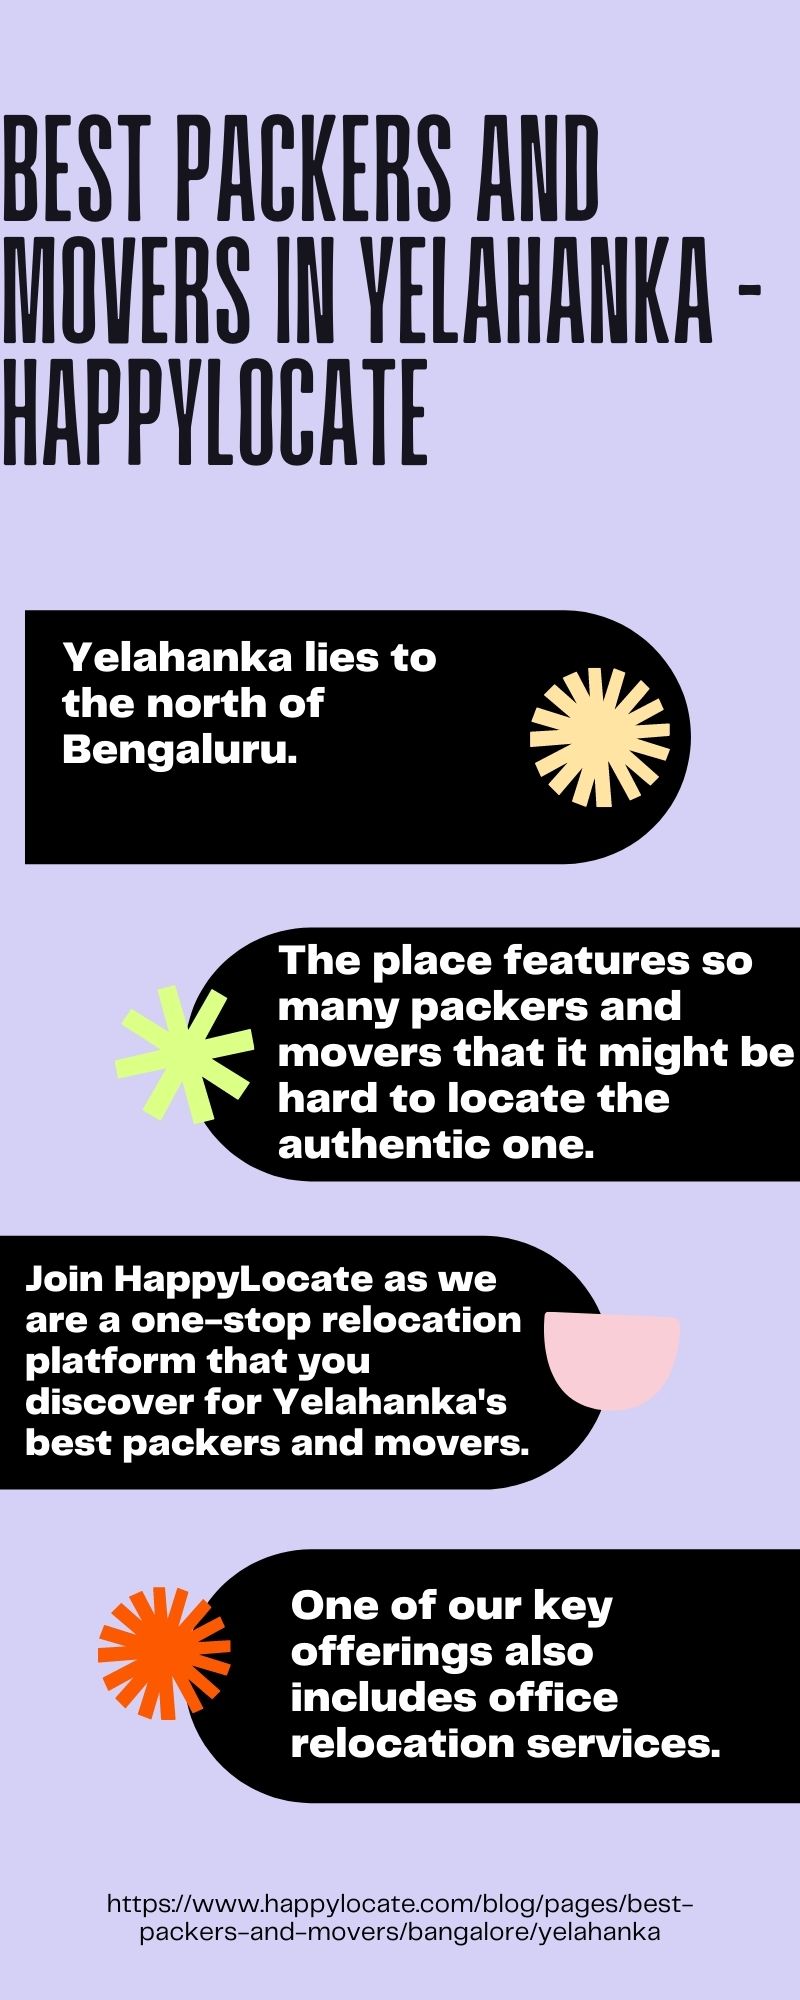 BEST PACKERS AND
MOVERS IN YELAHANKA -
HAPPYLOCATE

Yelahanka lies to

the north of
Bengaluru.

The place features so
many packers and
movers that it might be
hard to locate the
authentic one.

 

       
   
   
   

Join HappylLocate as we
are a one-stop relocation
platform that you
discover for Yelahanka's
best packers and movers.

One of our key
offerings also

includes office
relocation services.

 

https// www. happylocate.com/blog/pages/best
packers-and-movers/bangalore/yelahanka